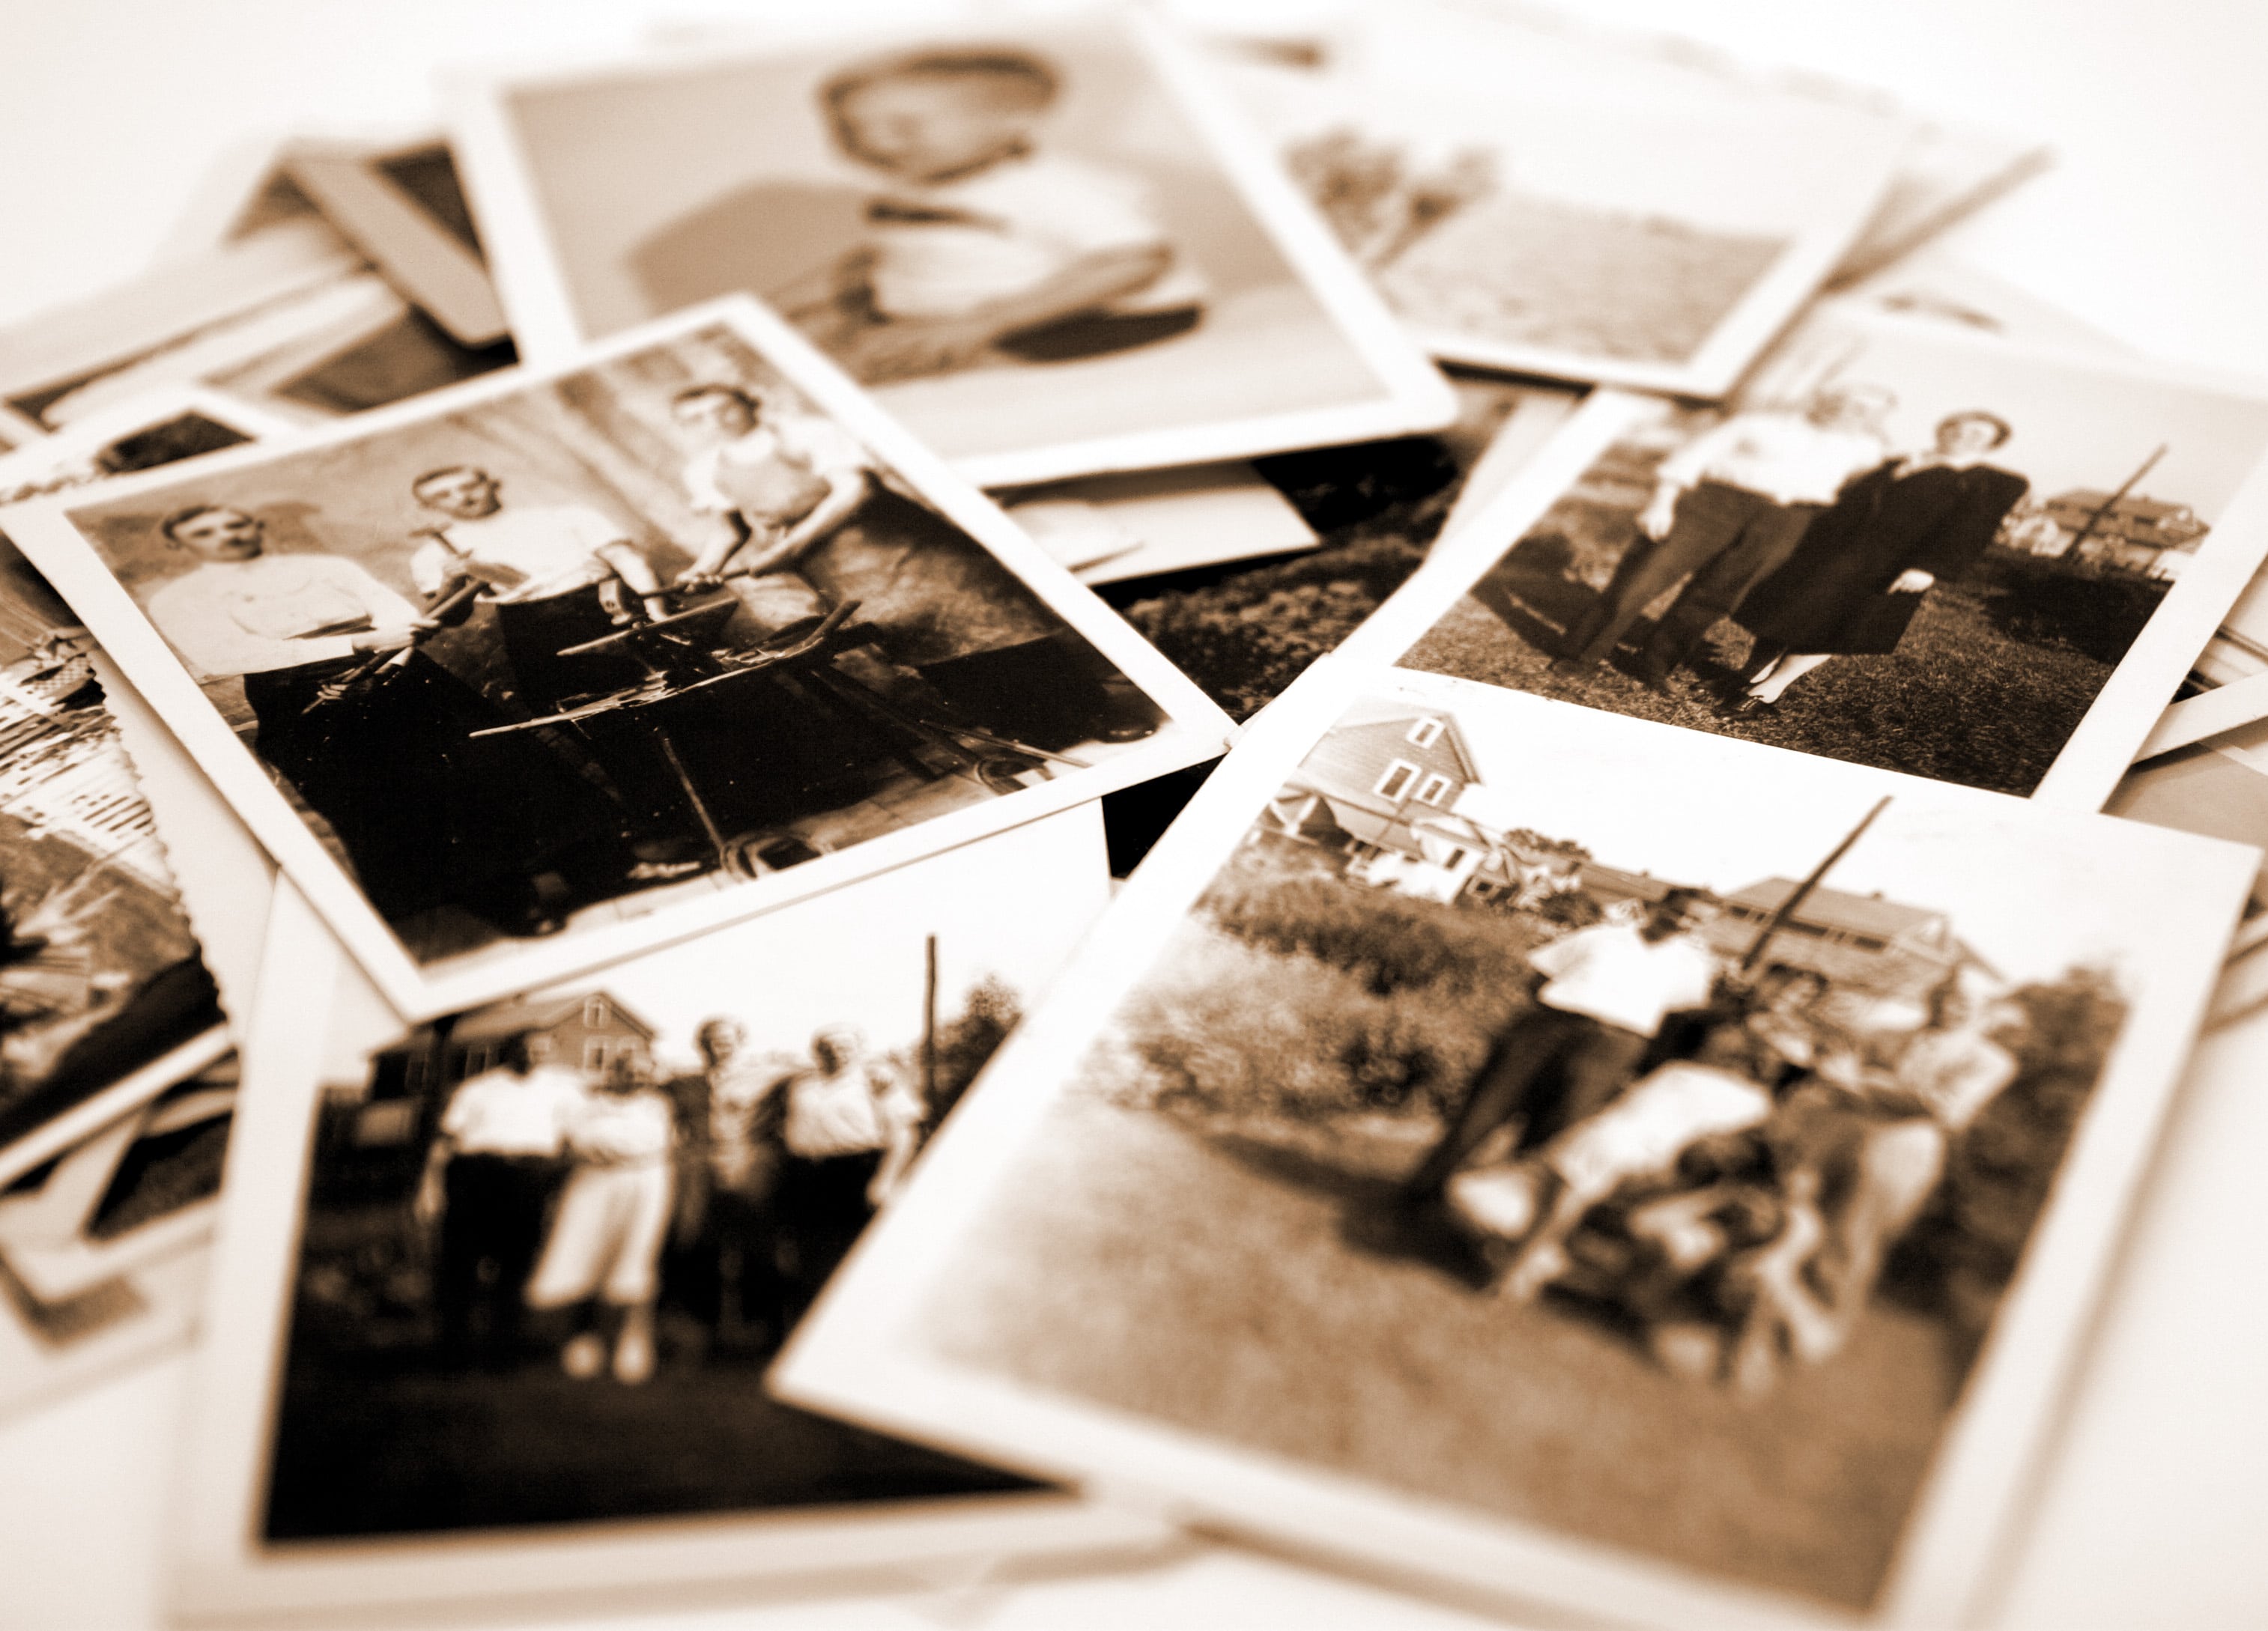 Black and White polaroid pictures are spread out on a table.